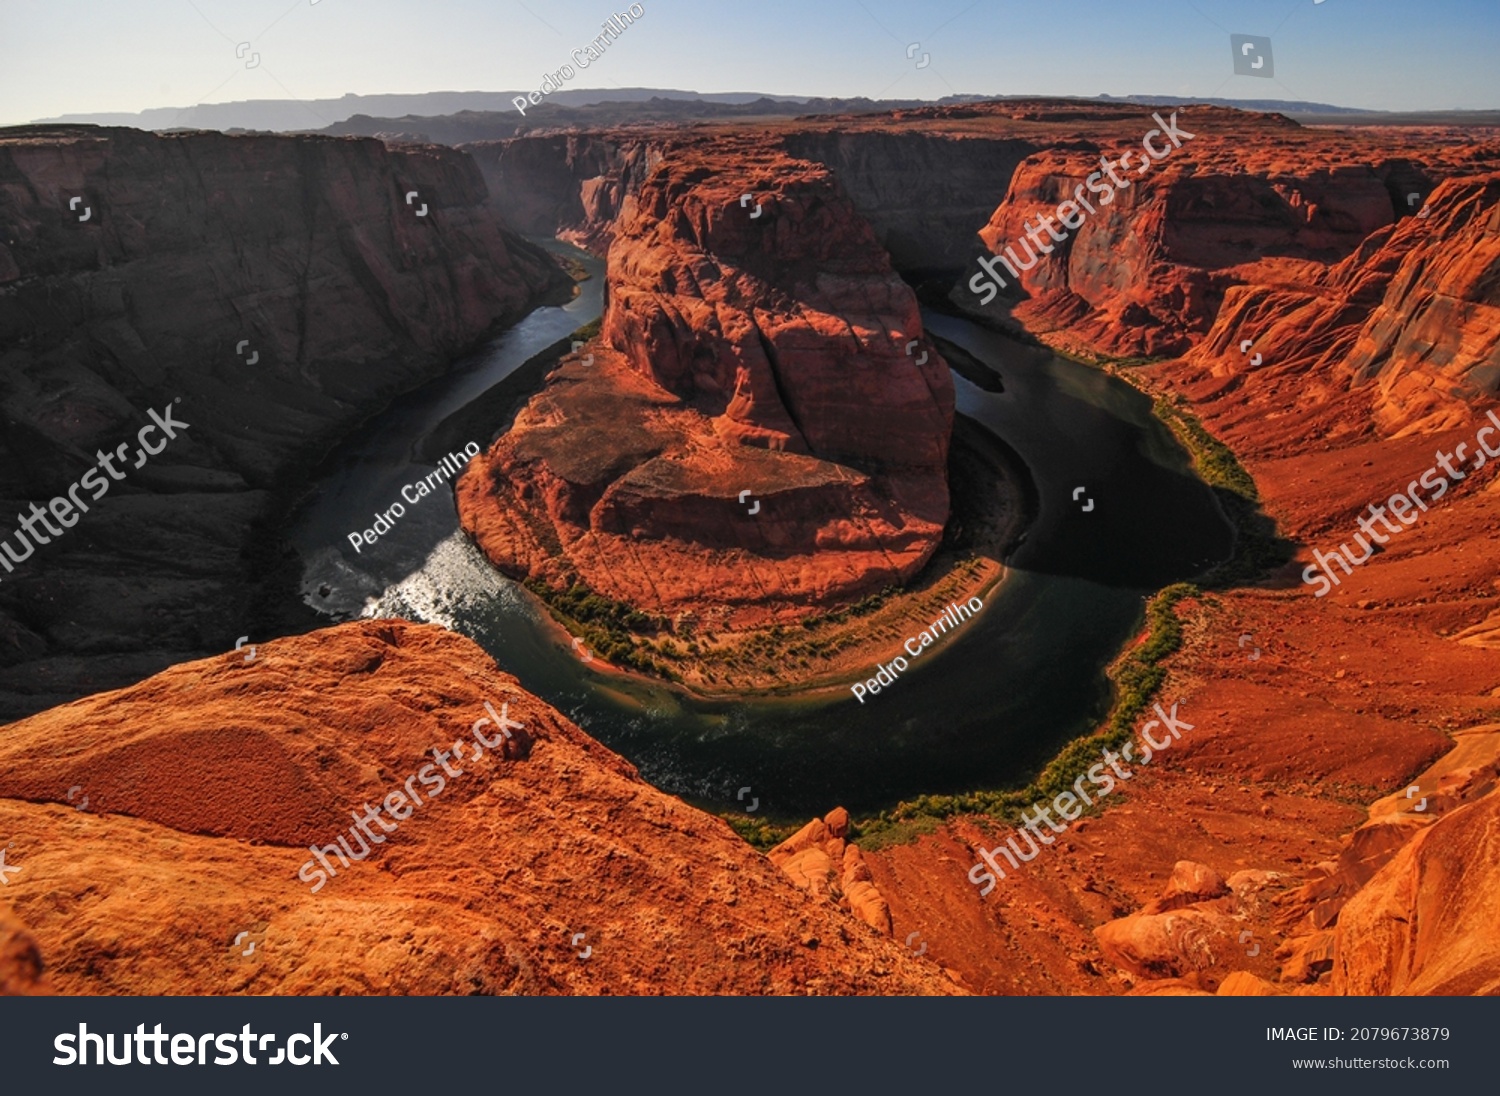 Harsh afternoon light at the popular Horseshoe Bend of the Colorado river, Glen Canyon National Recreation Area, Page, Arizona, Southwest USA #2079673879